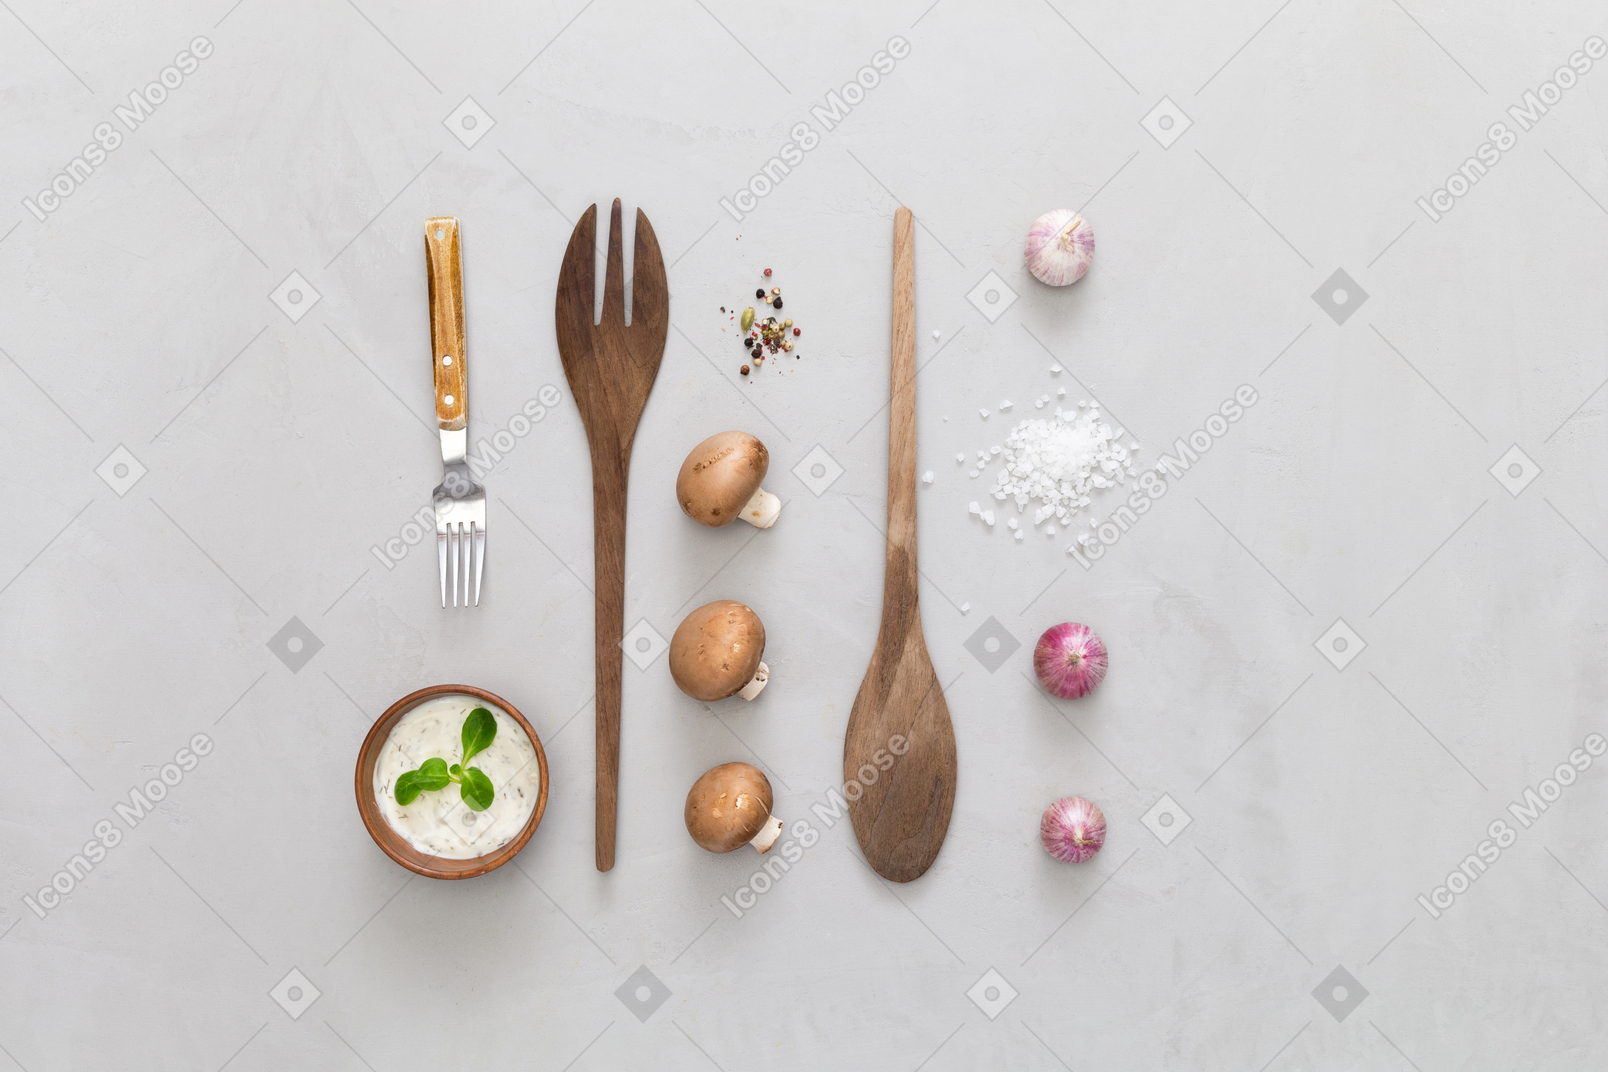 Champignons, garlic, spices and wooden spoons